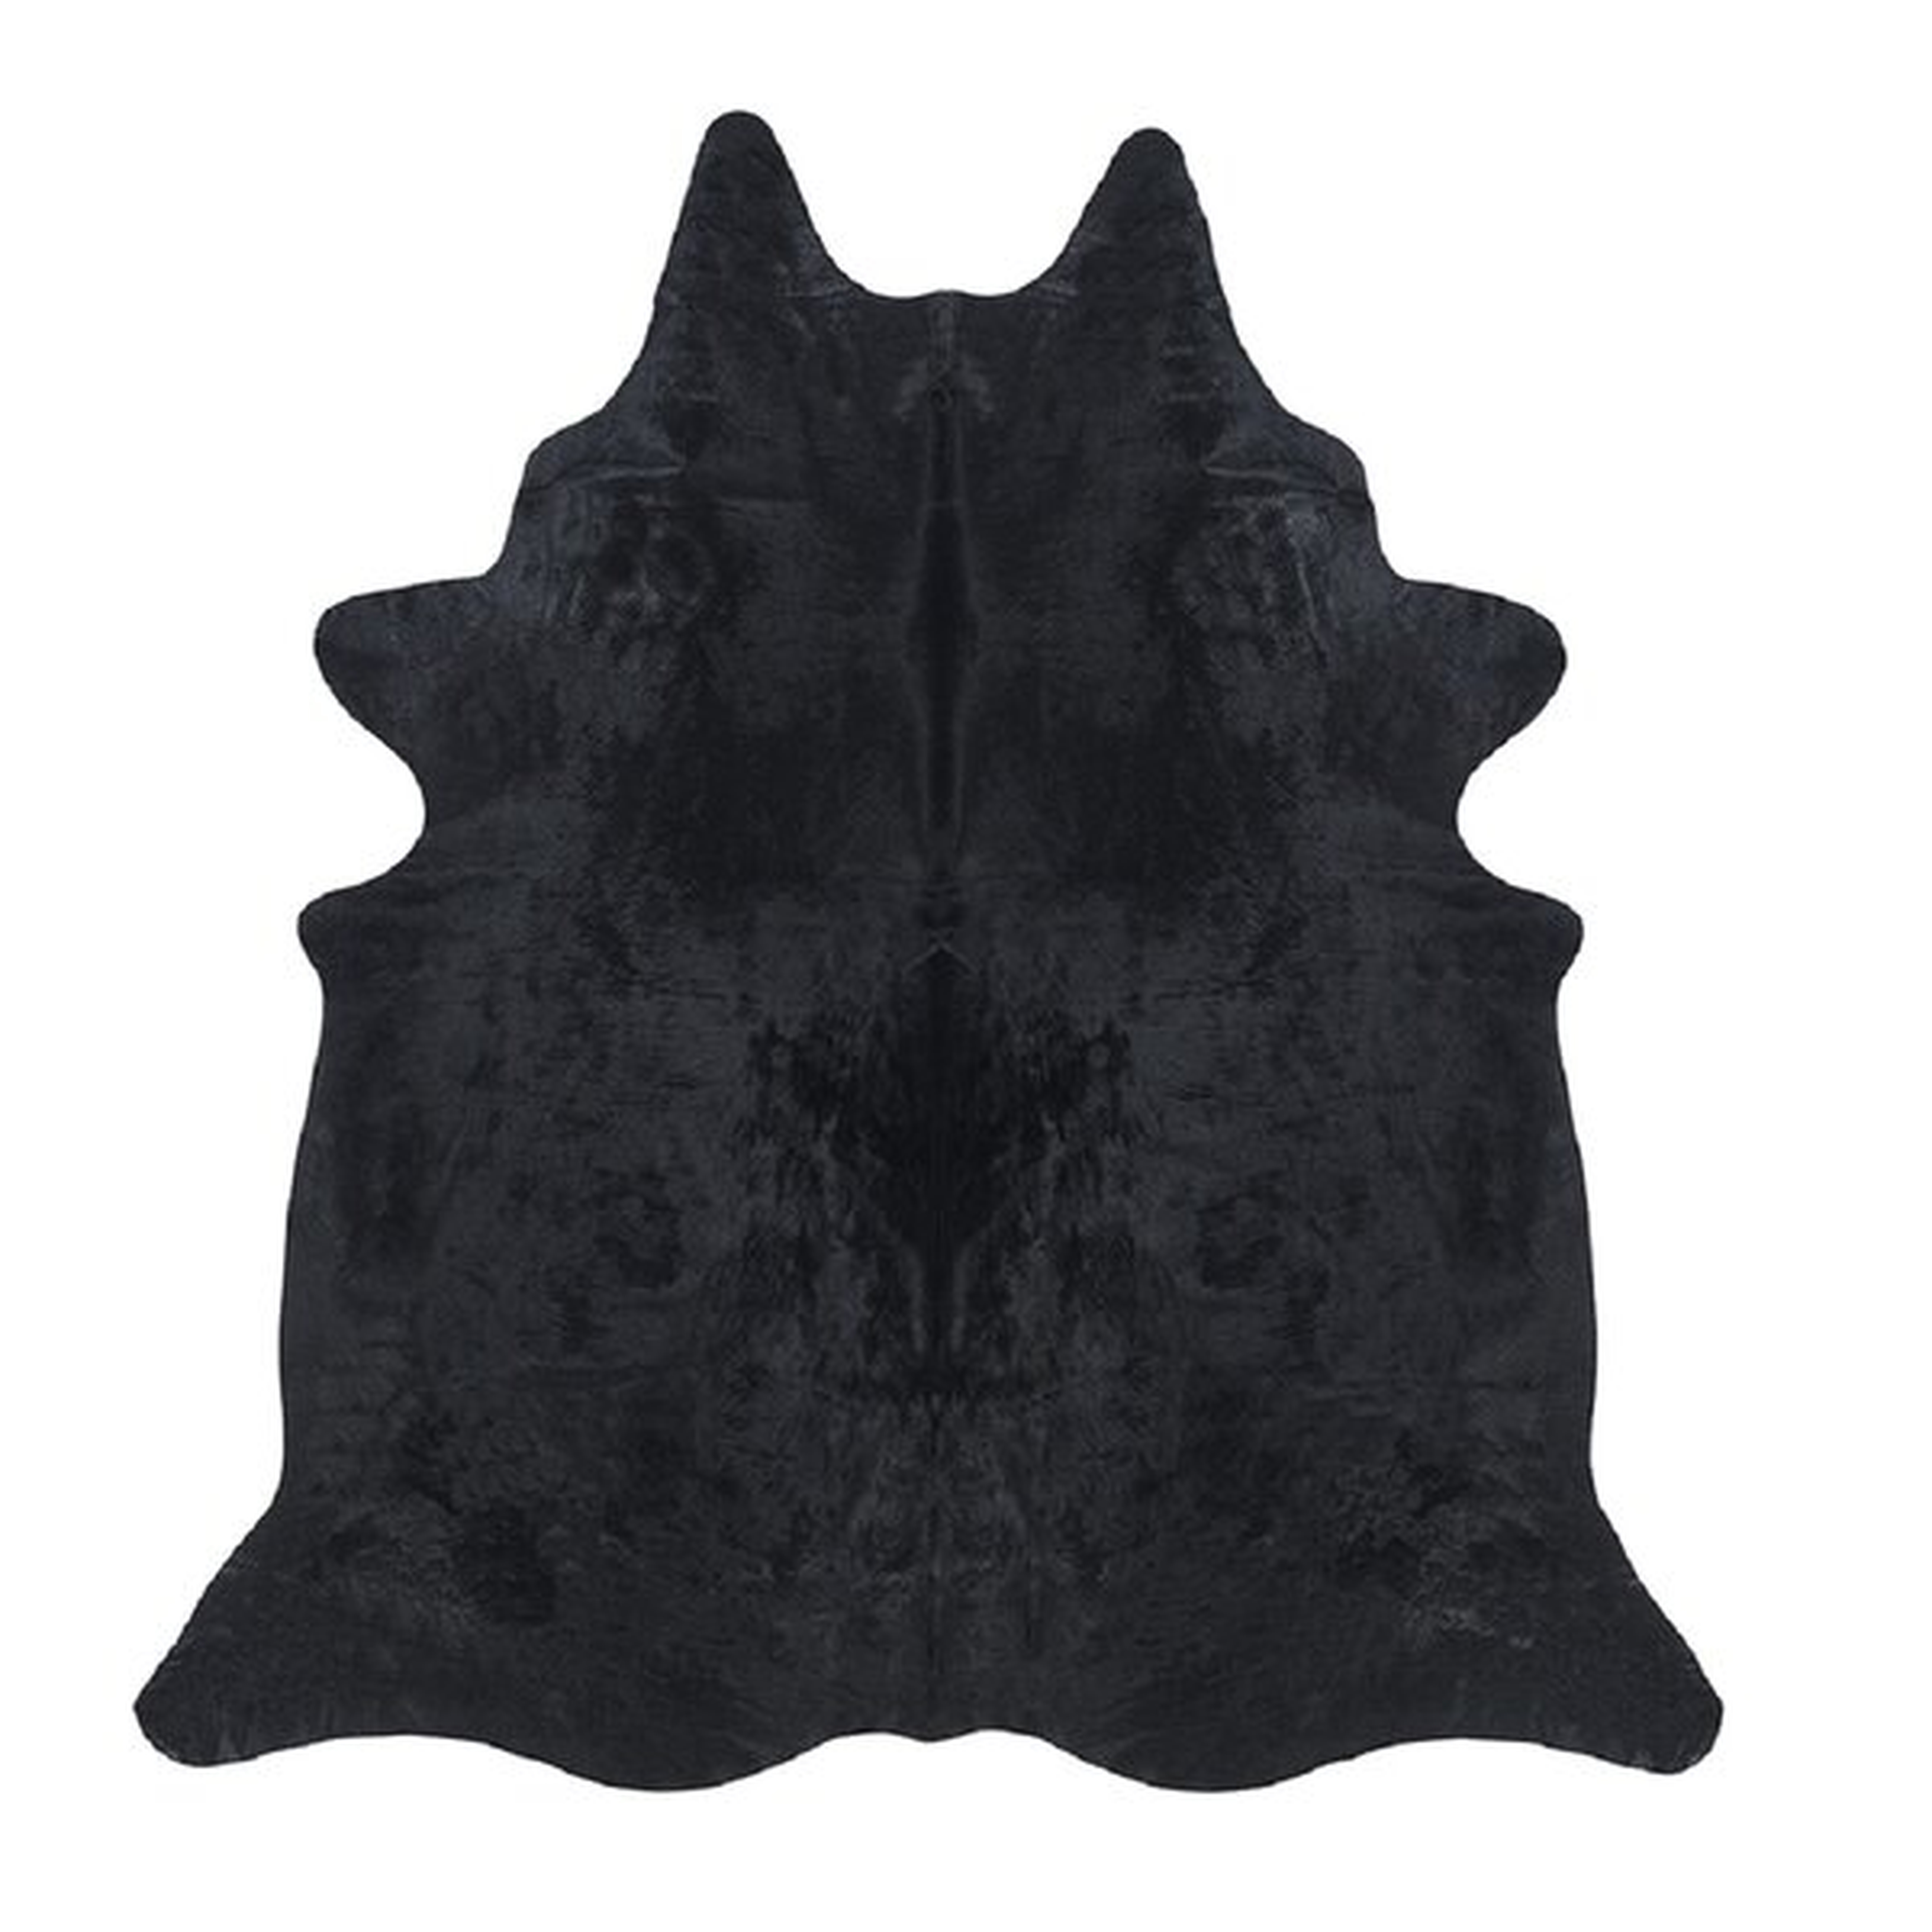 SOLID DYED COWHIDE BLACK AREA RUG - Perigold